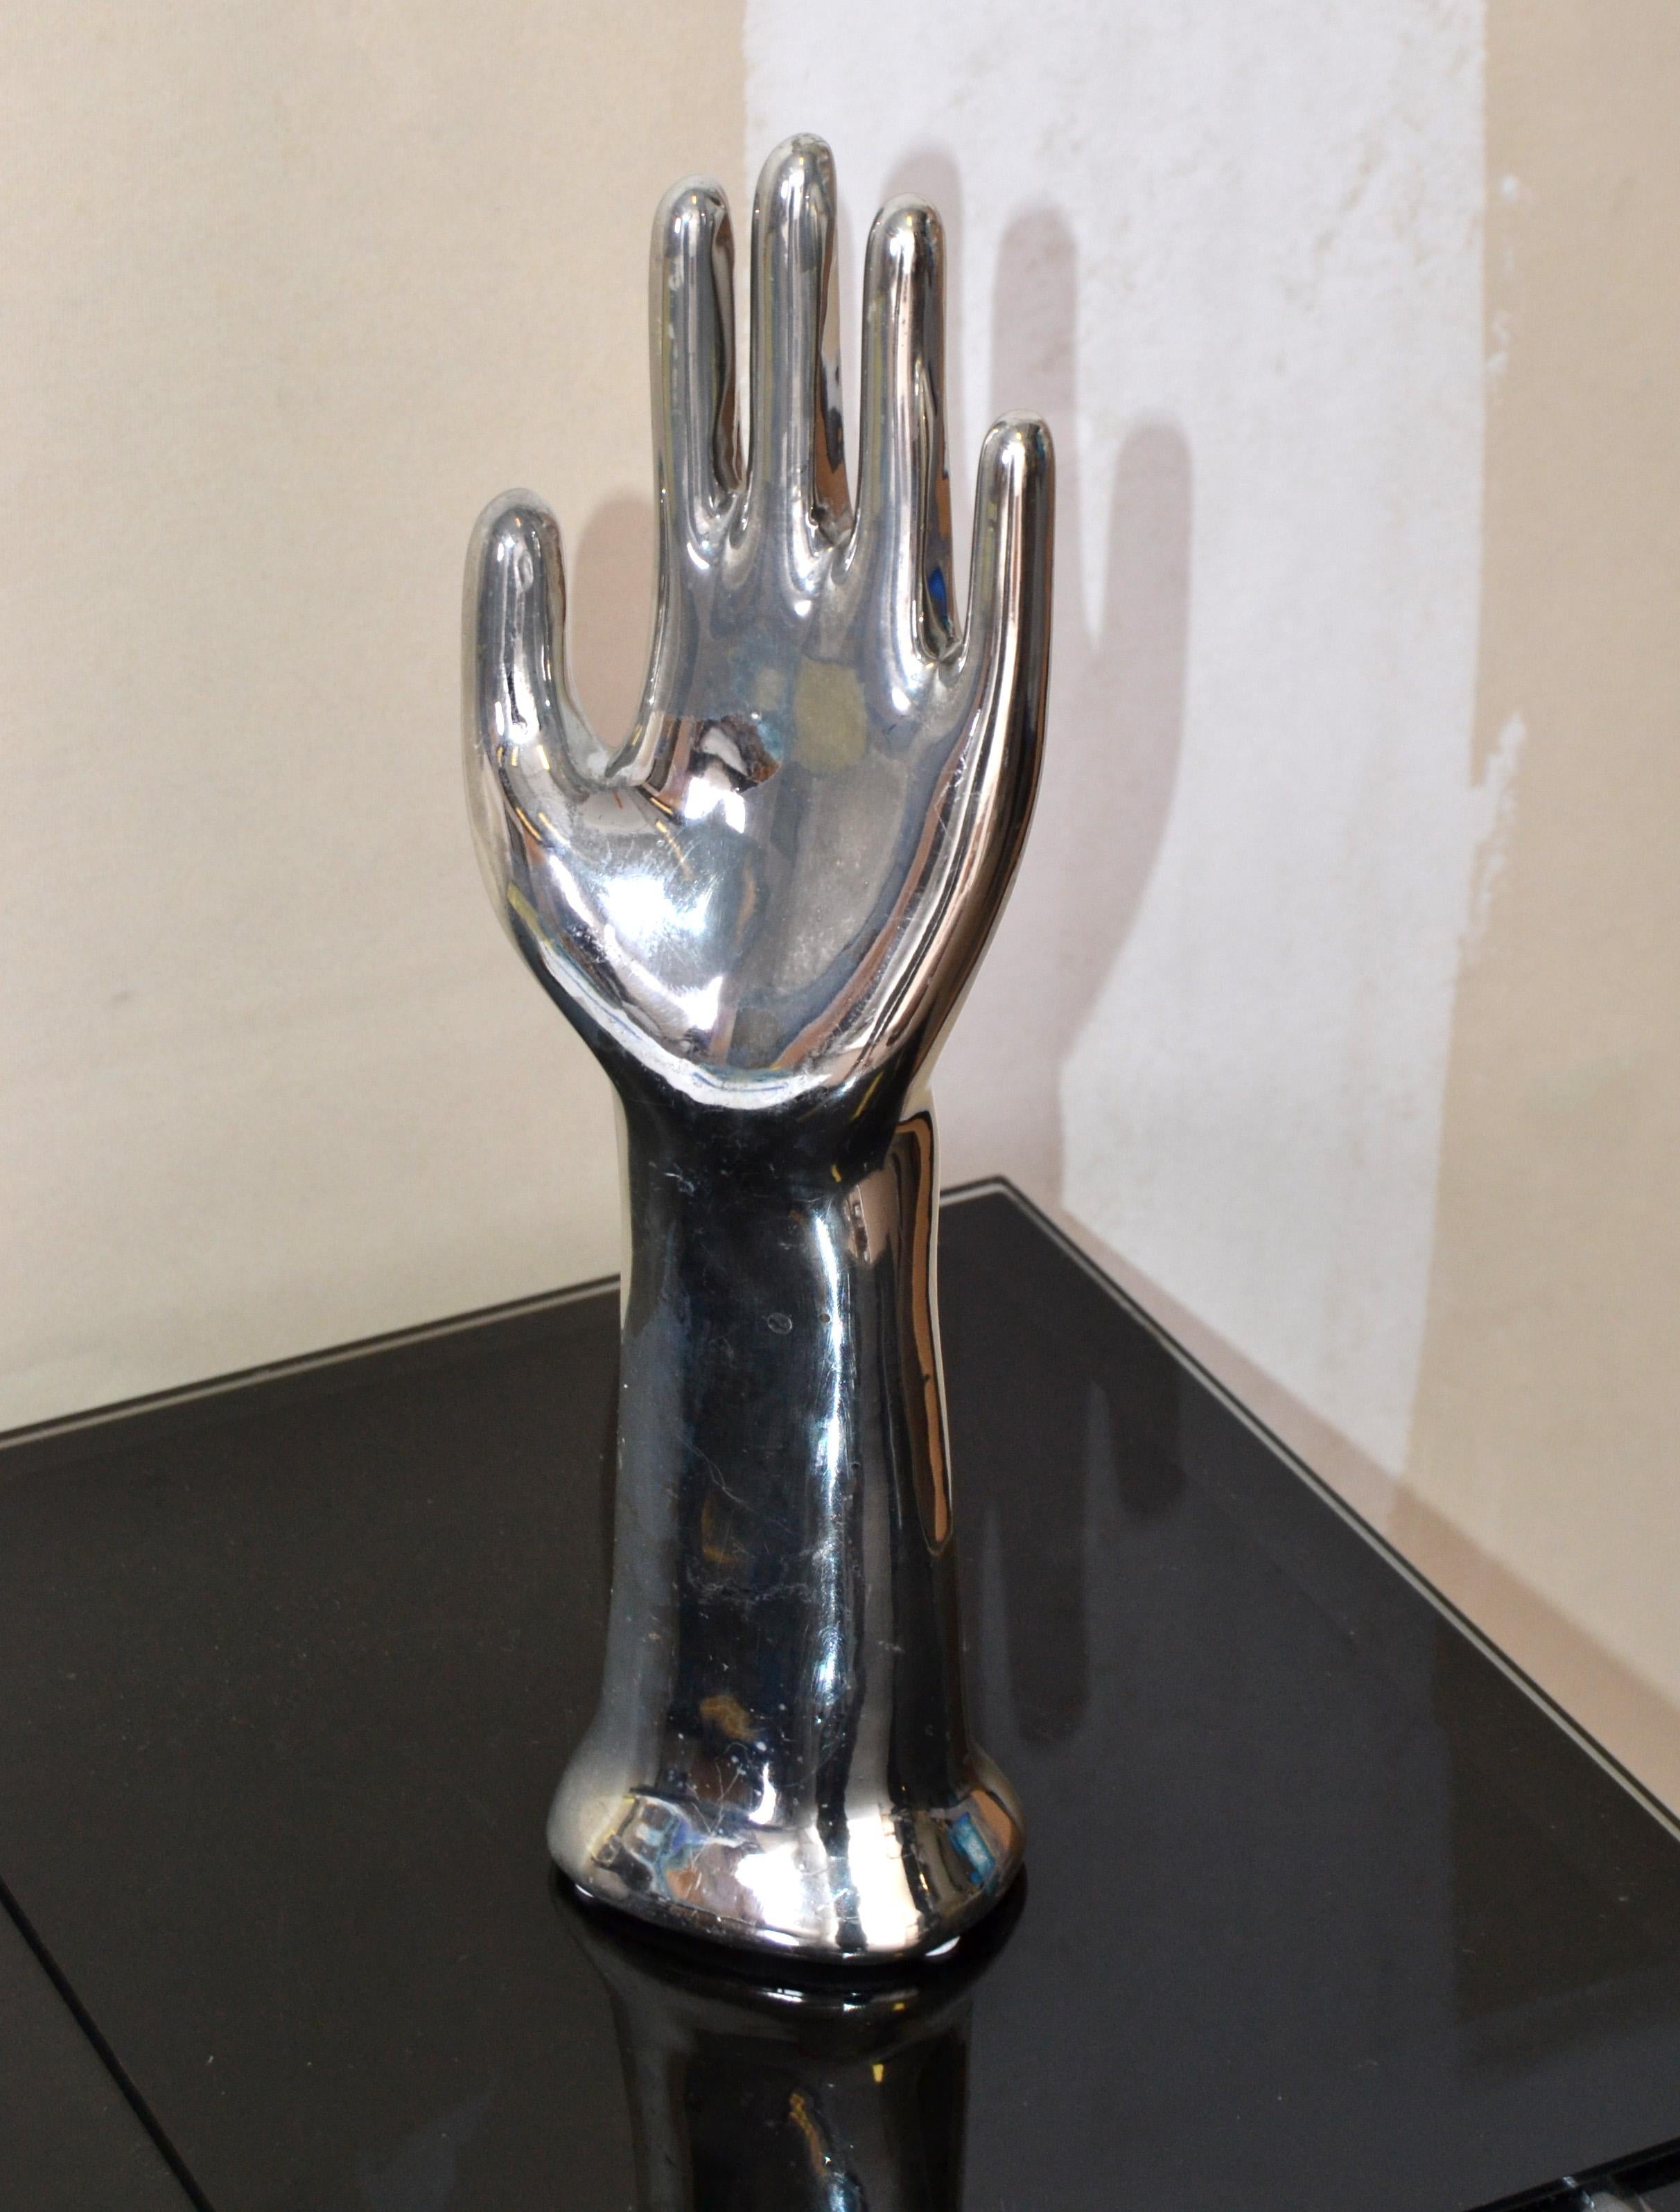 Vintage Porcelain Hand Glove Mold Nickel Plated Jewelry Stand Sculpture  1970s